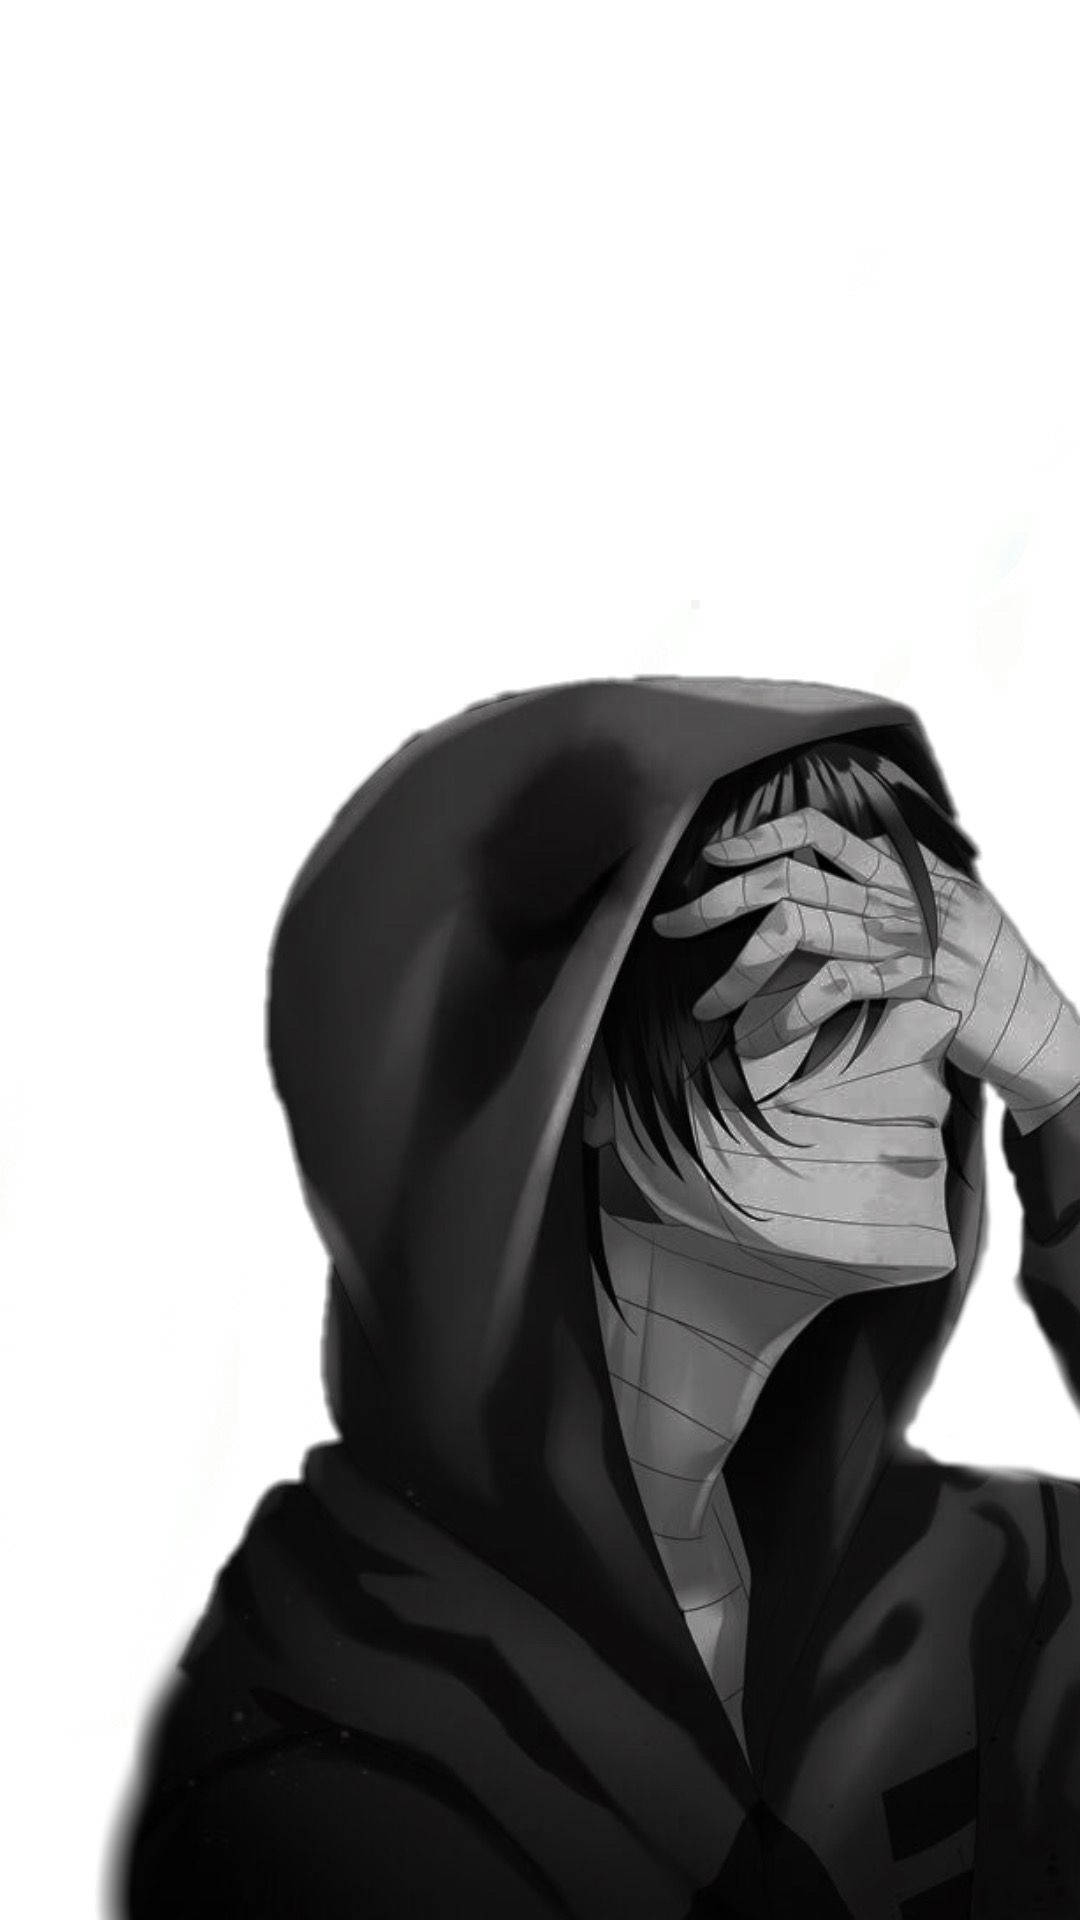 Black And White Anime Boy Covering Eyes Wallpaper